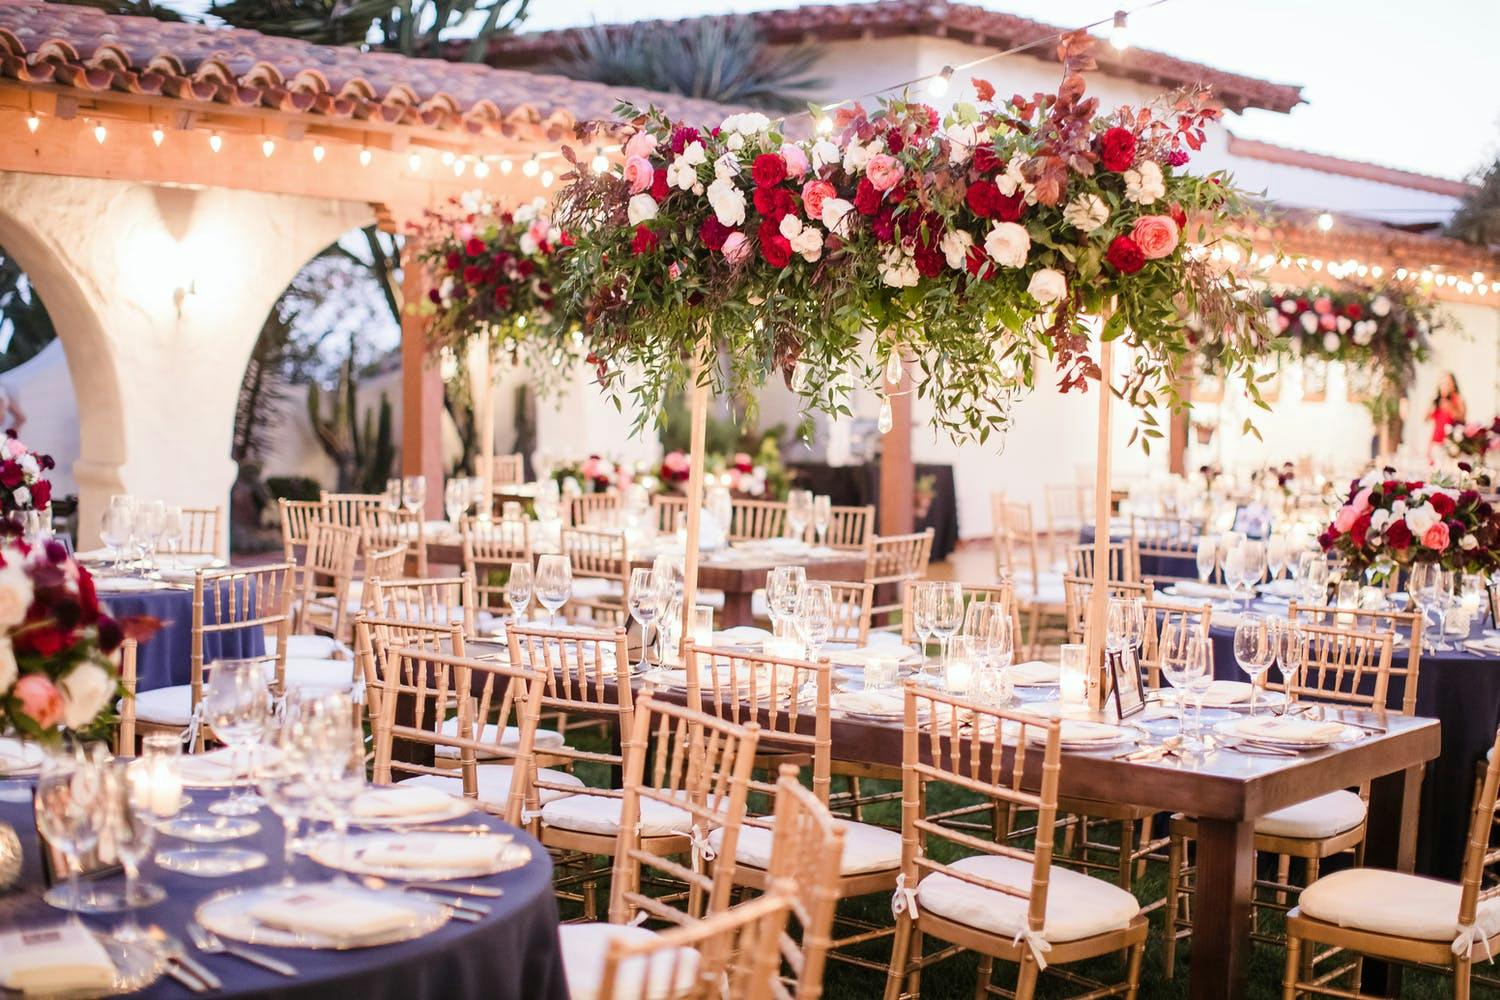 Mediterranean-Style Elevated Rose Wedding Centerpieces With Cascades of Greenery | PartySlate